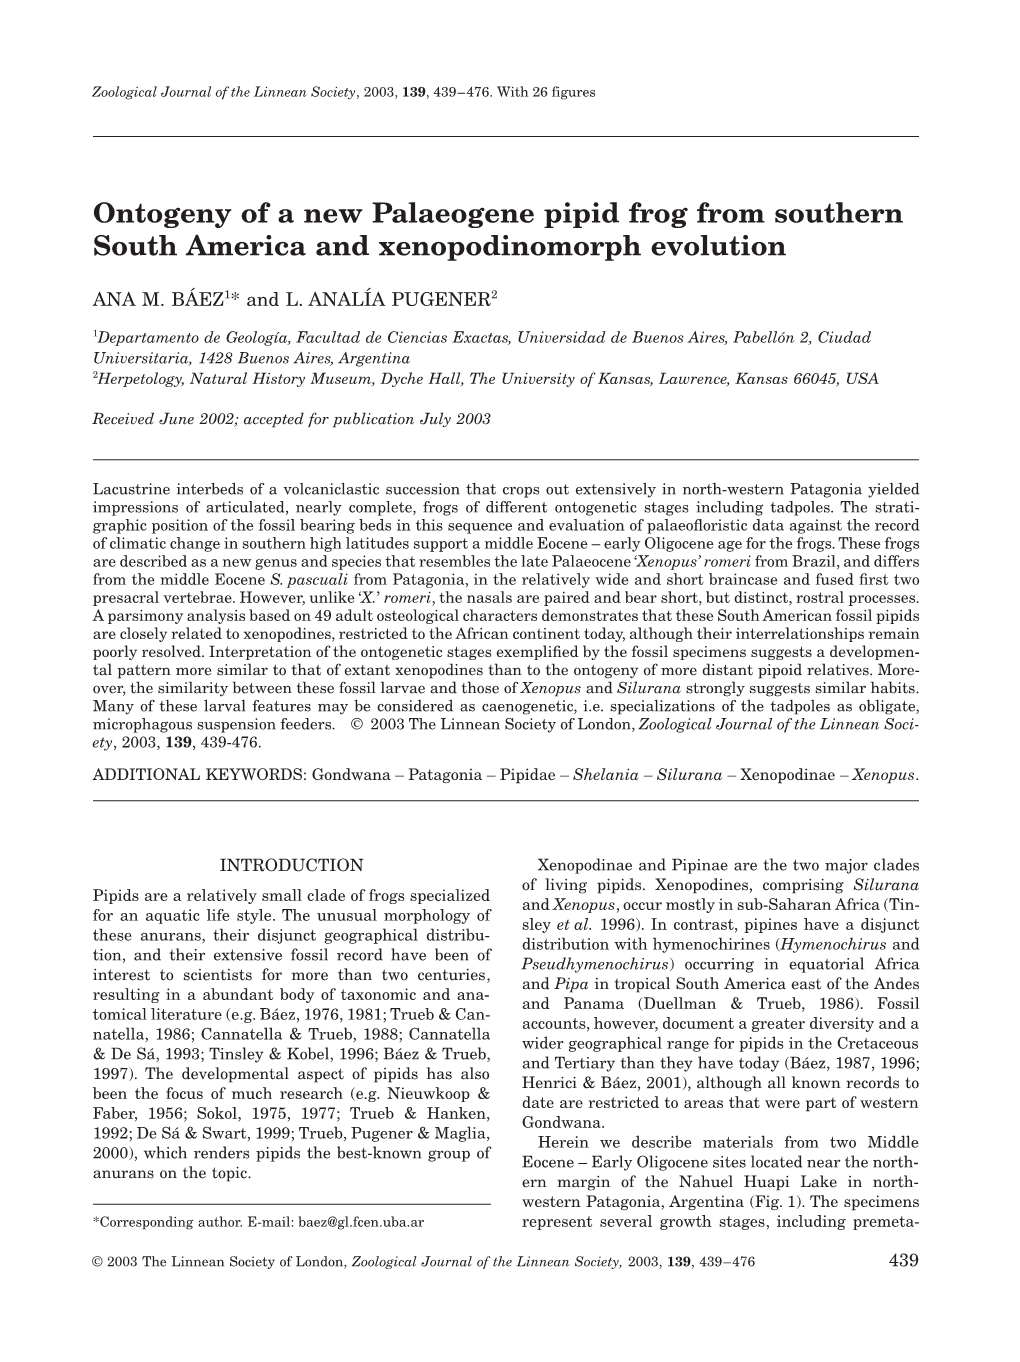 Ontogeny of a New Palaeogene Pipid Frog from Southern South America and Xenopodinomorph Evolution